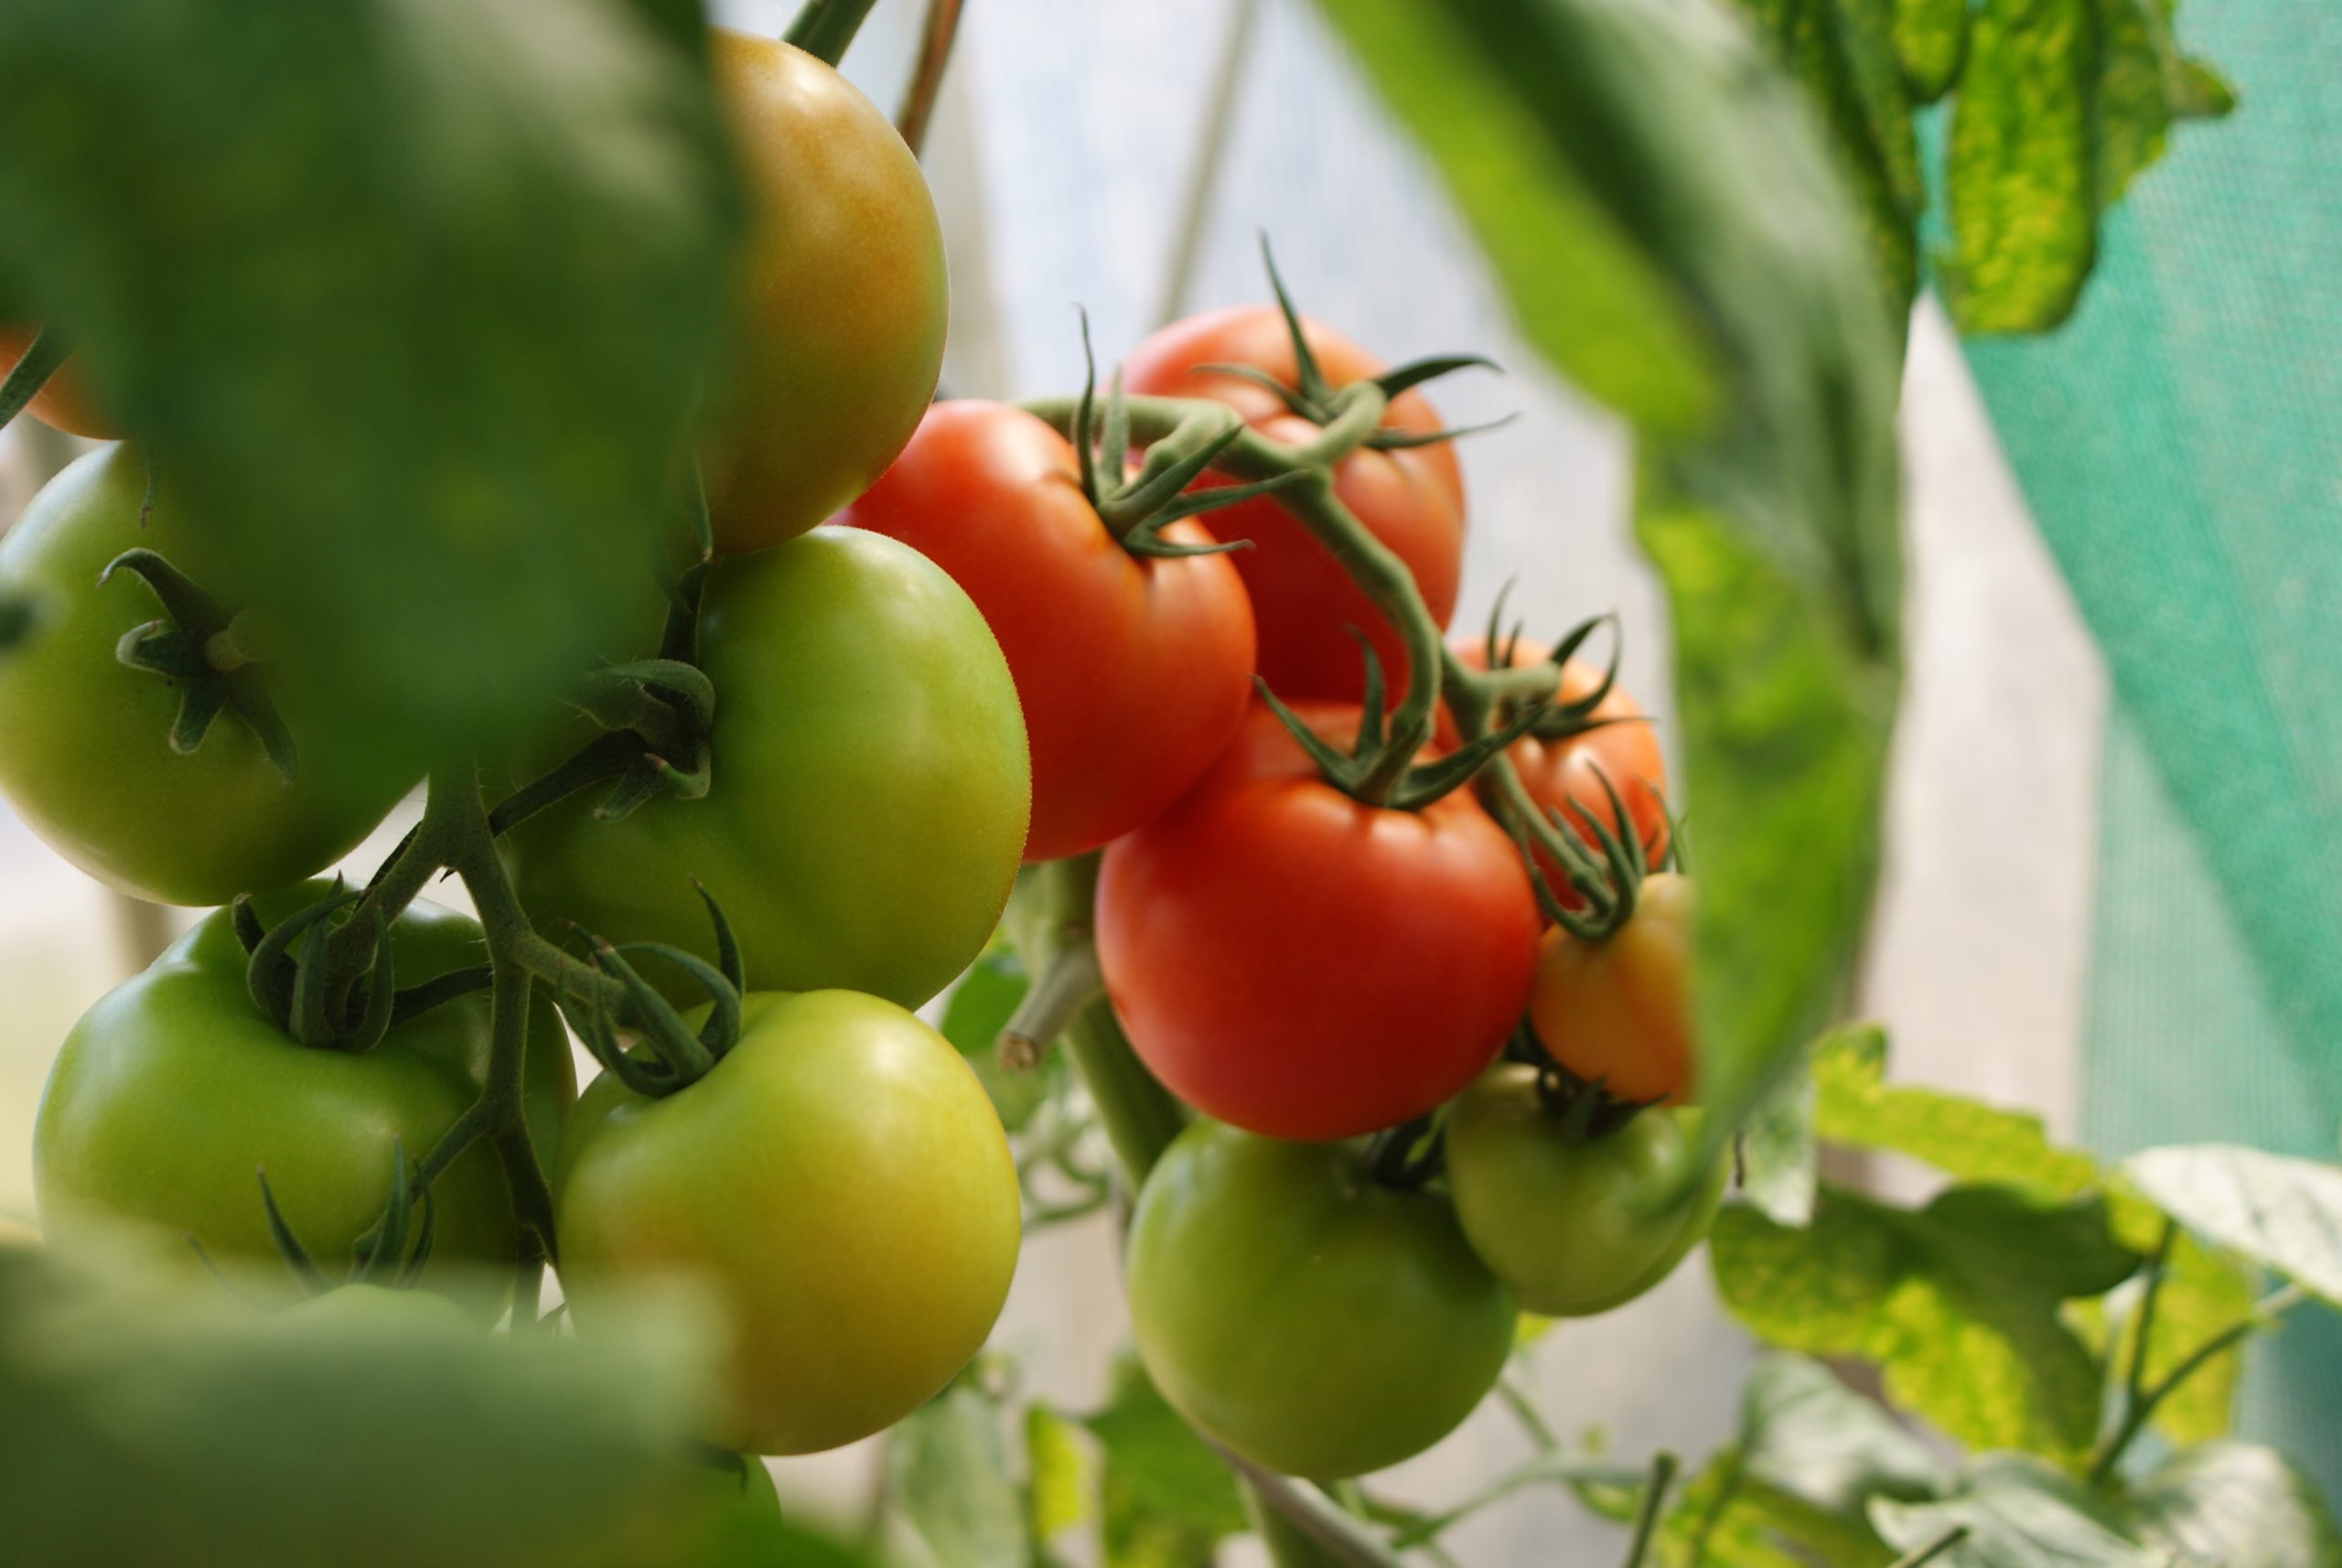 Monsoon Tomato Cultivation